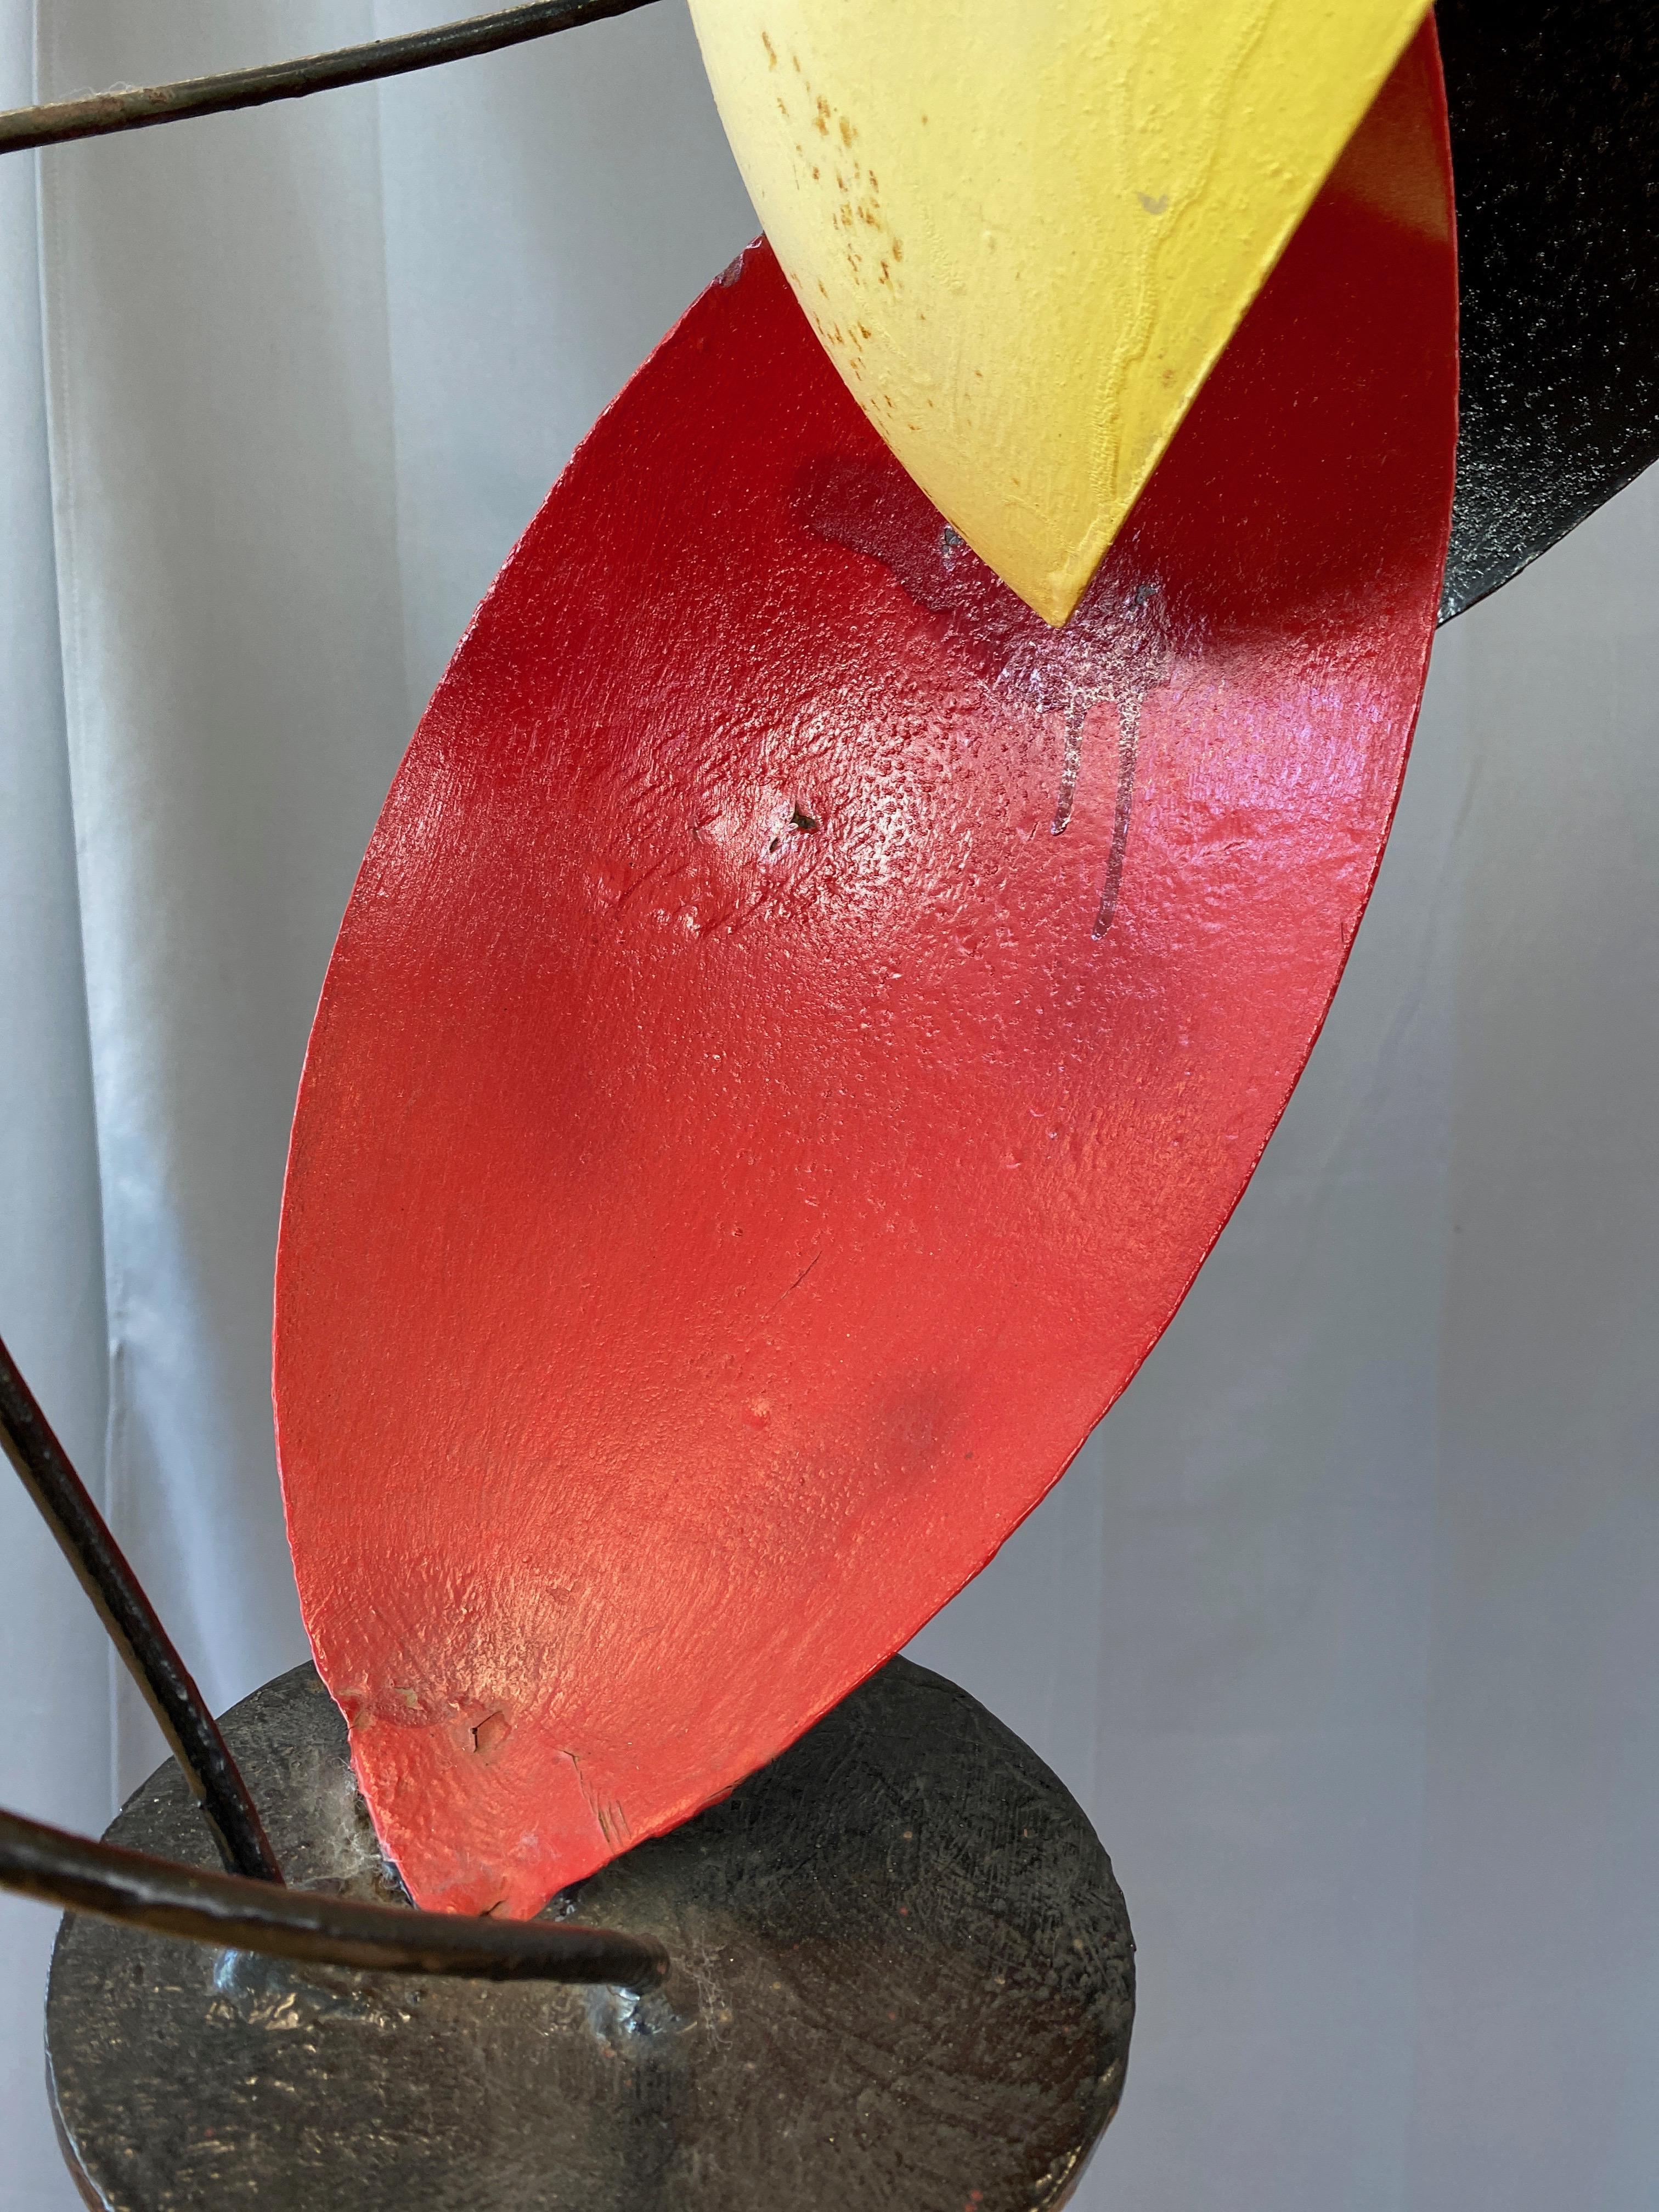 Béla Harcos Tall Abstract Expressionist Enameled Steel Sculpture, Late 1990s For Sale 7